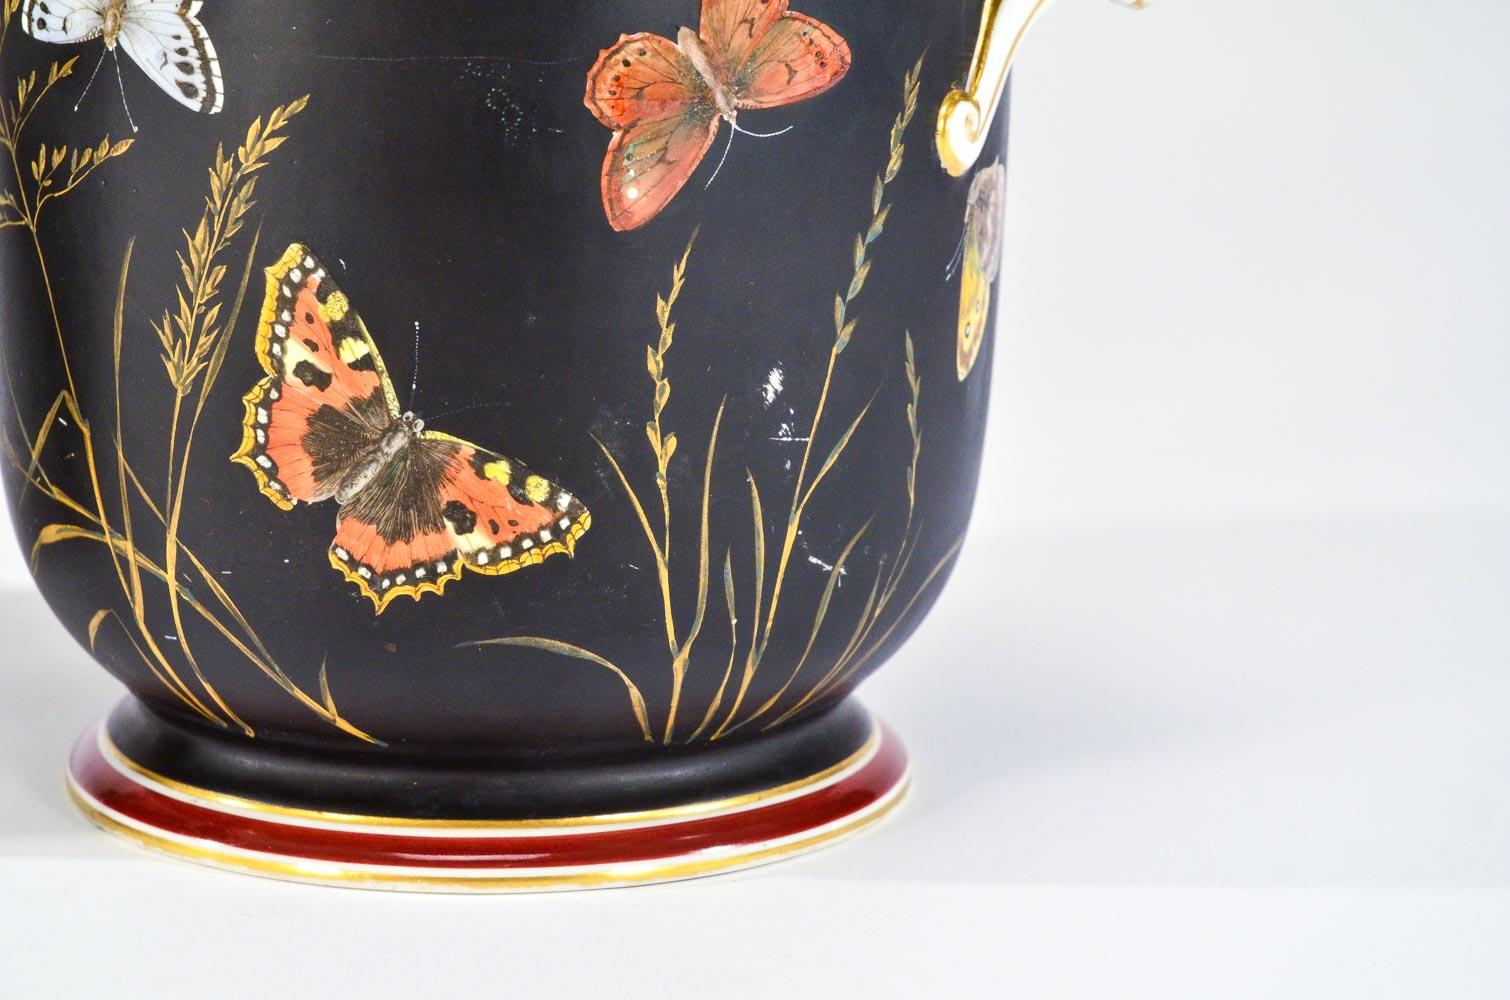 This is an unusually decorated pair of Vieux Paris cachepots in that the body is decorated in a matte black enamel and further embellished with butterflies in flight. The butterflies are interspersed with gold leaves and sheaves of wheat with the